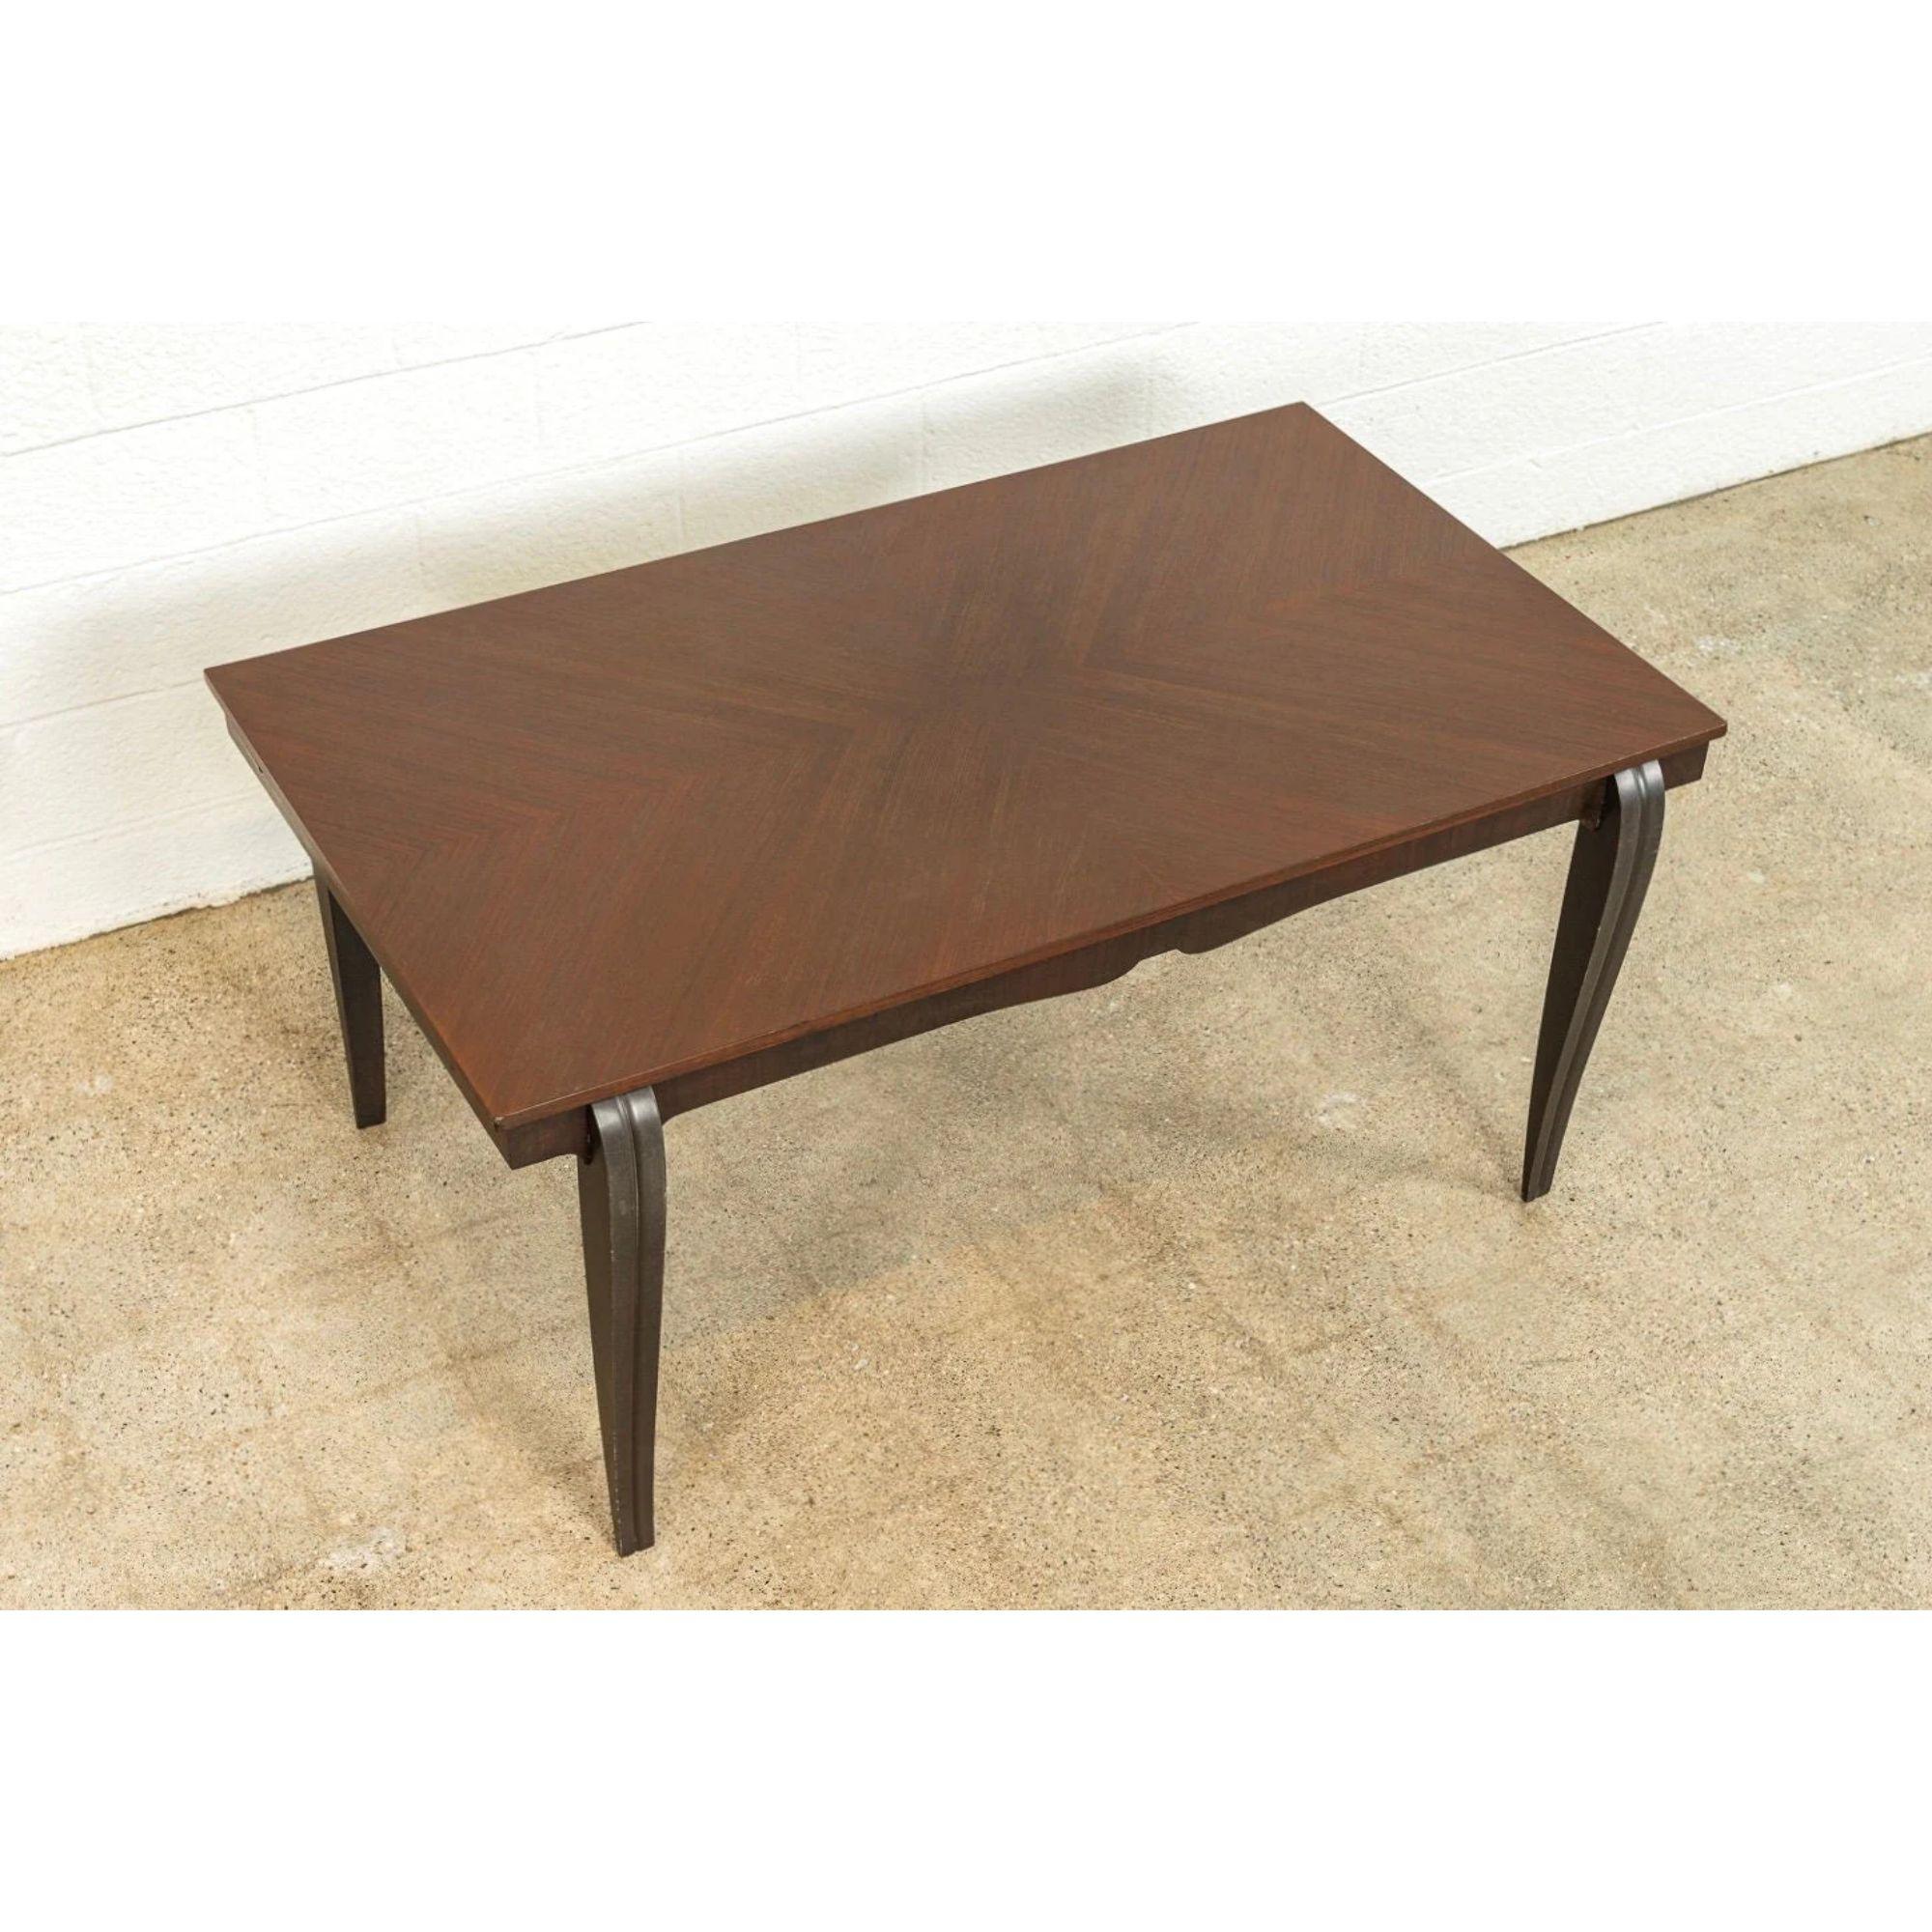 Unknown Antique French Art Deco Dining Table or Writing Desk in Mahogany Wood, 1930s For Sale